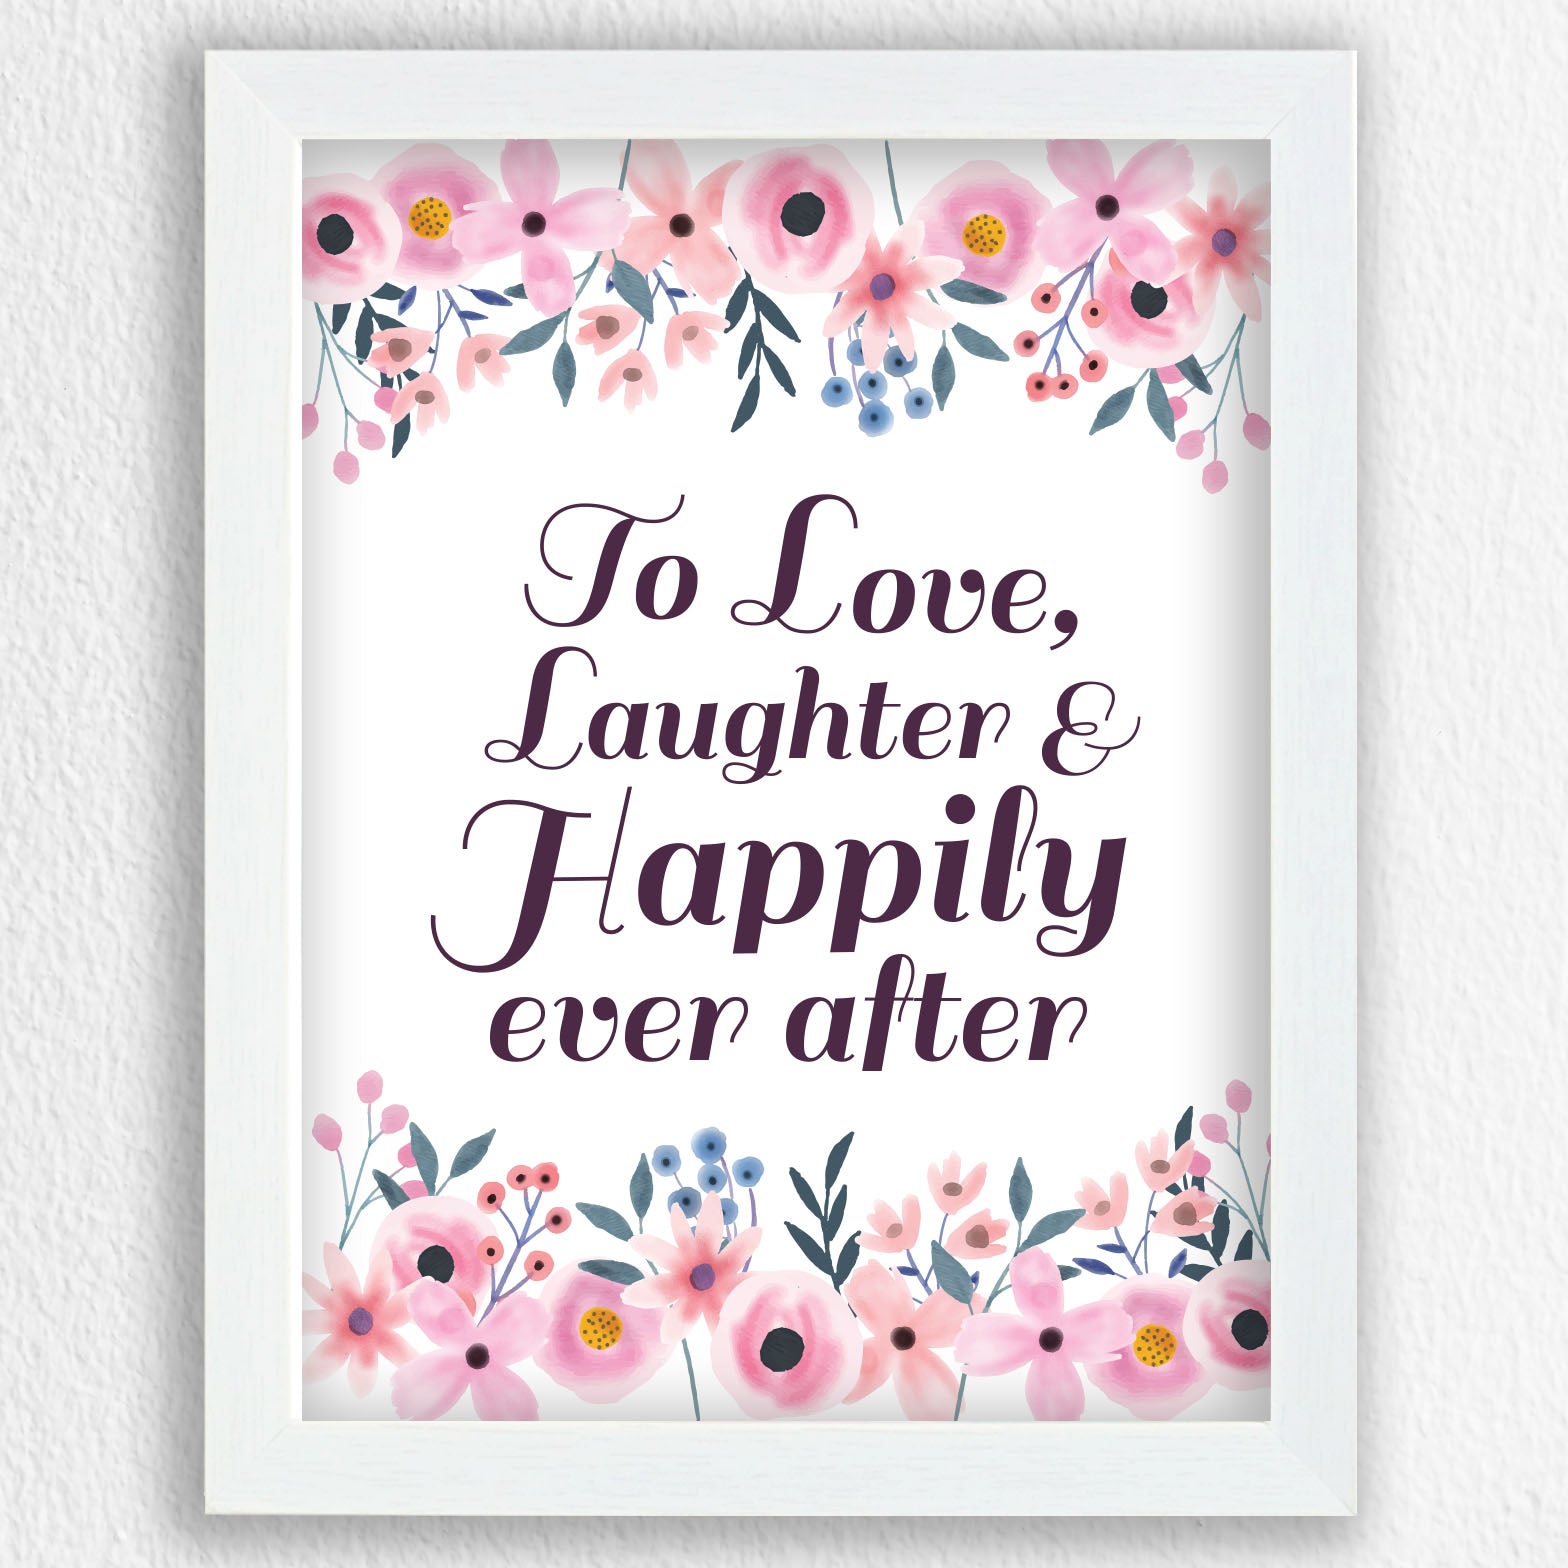 Happily Ever After - Art Frame